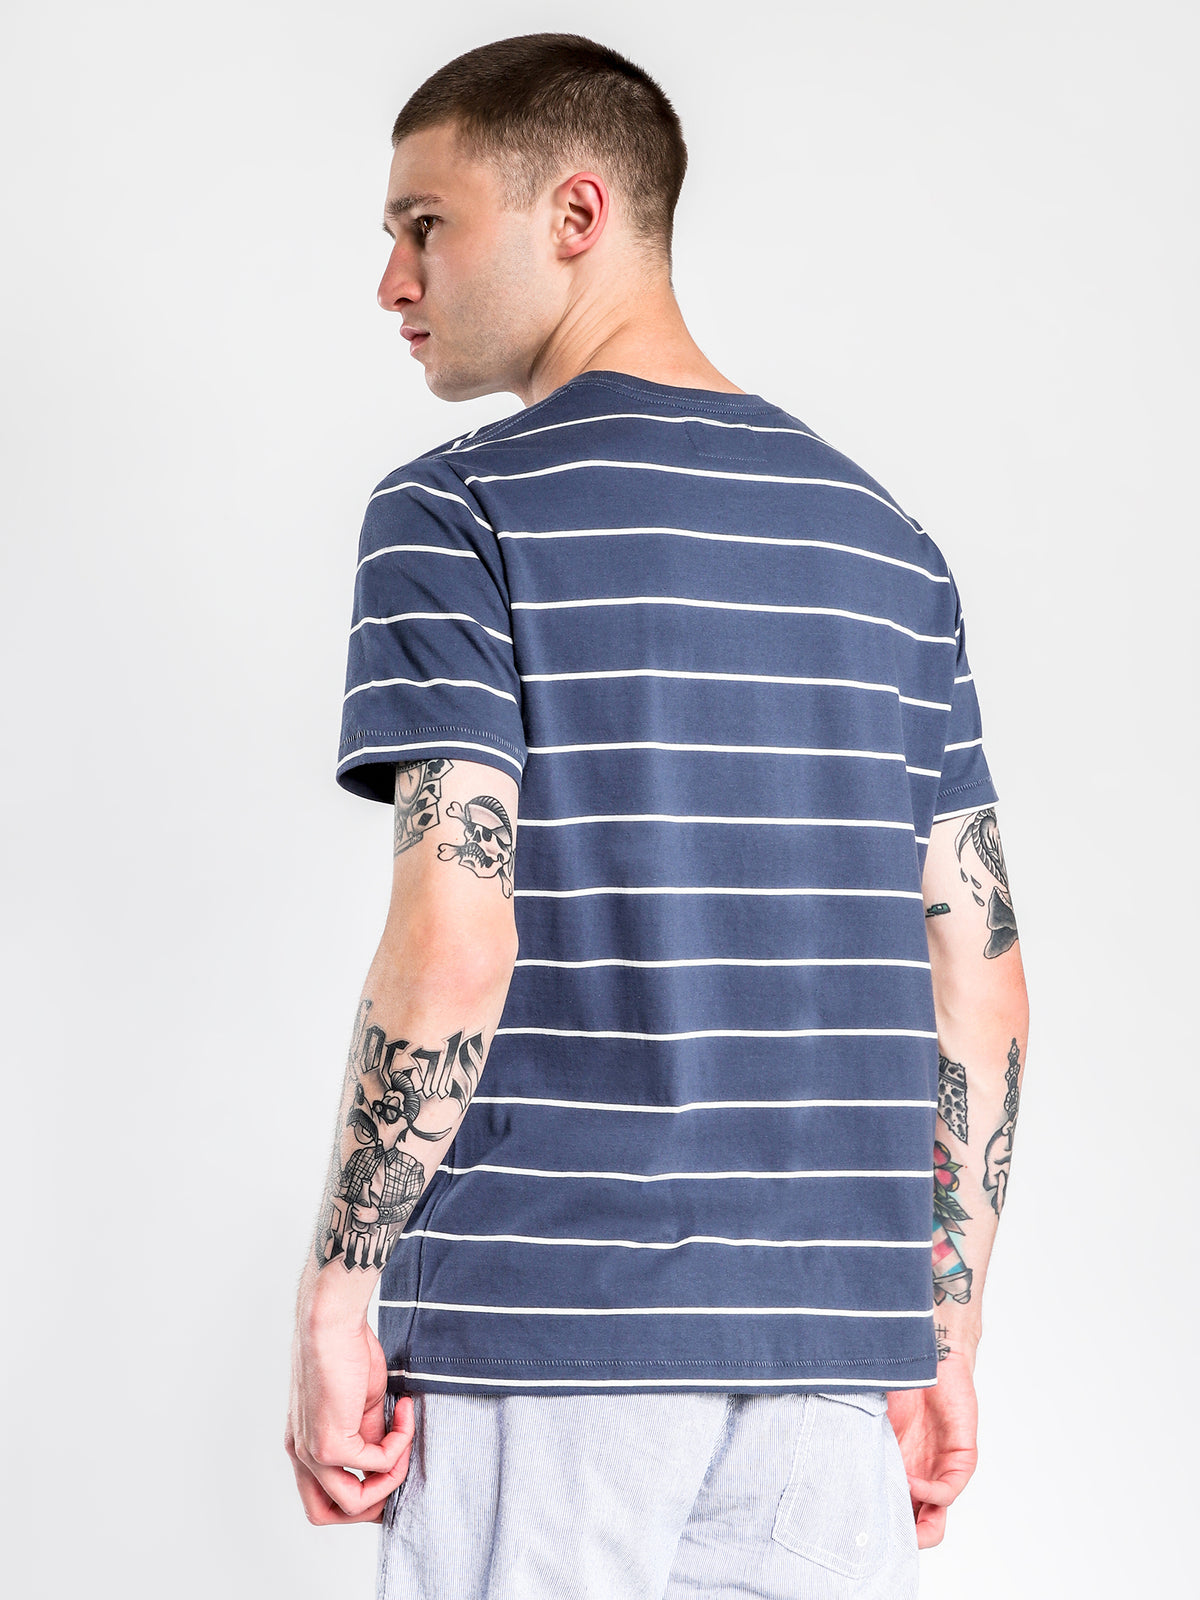 Barney Cools T-Shirt in Navy Stripe